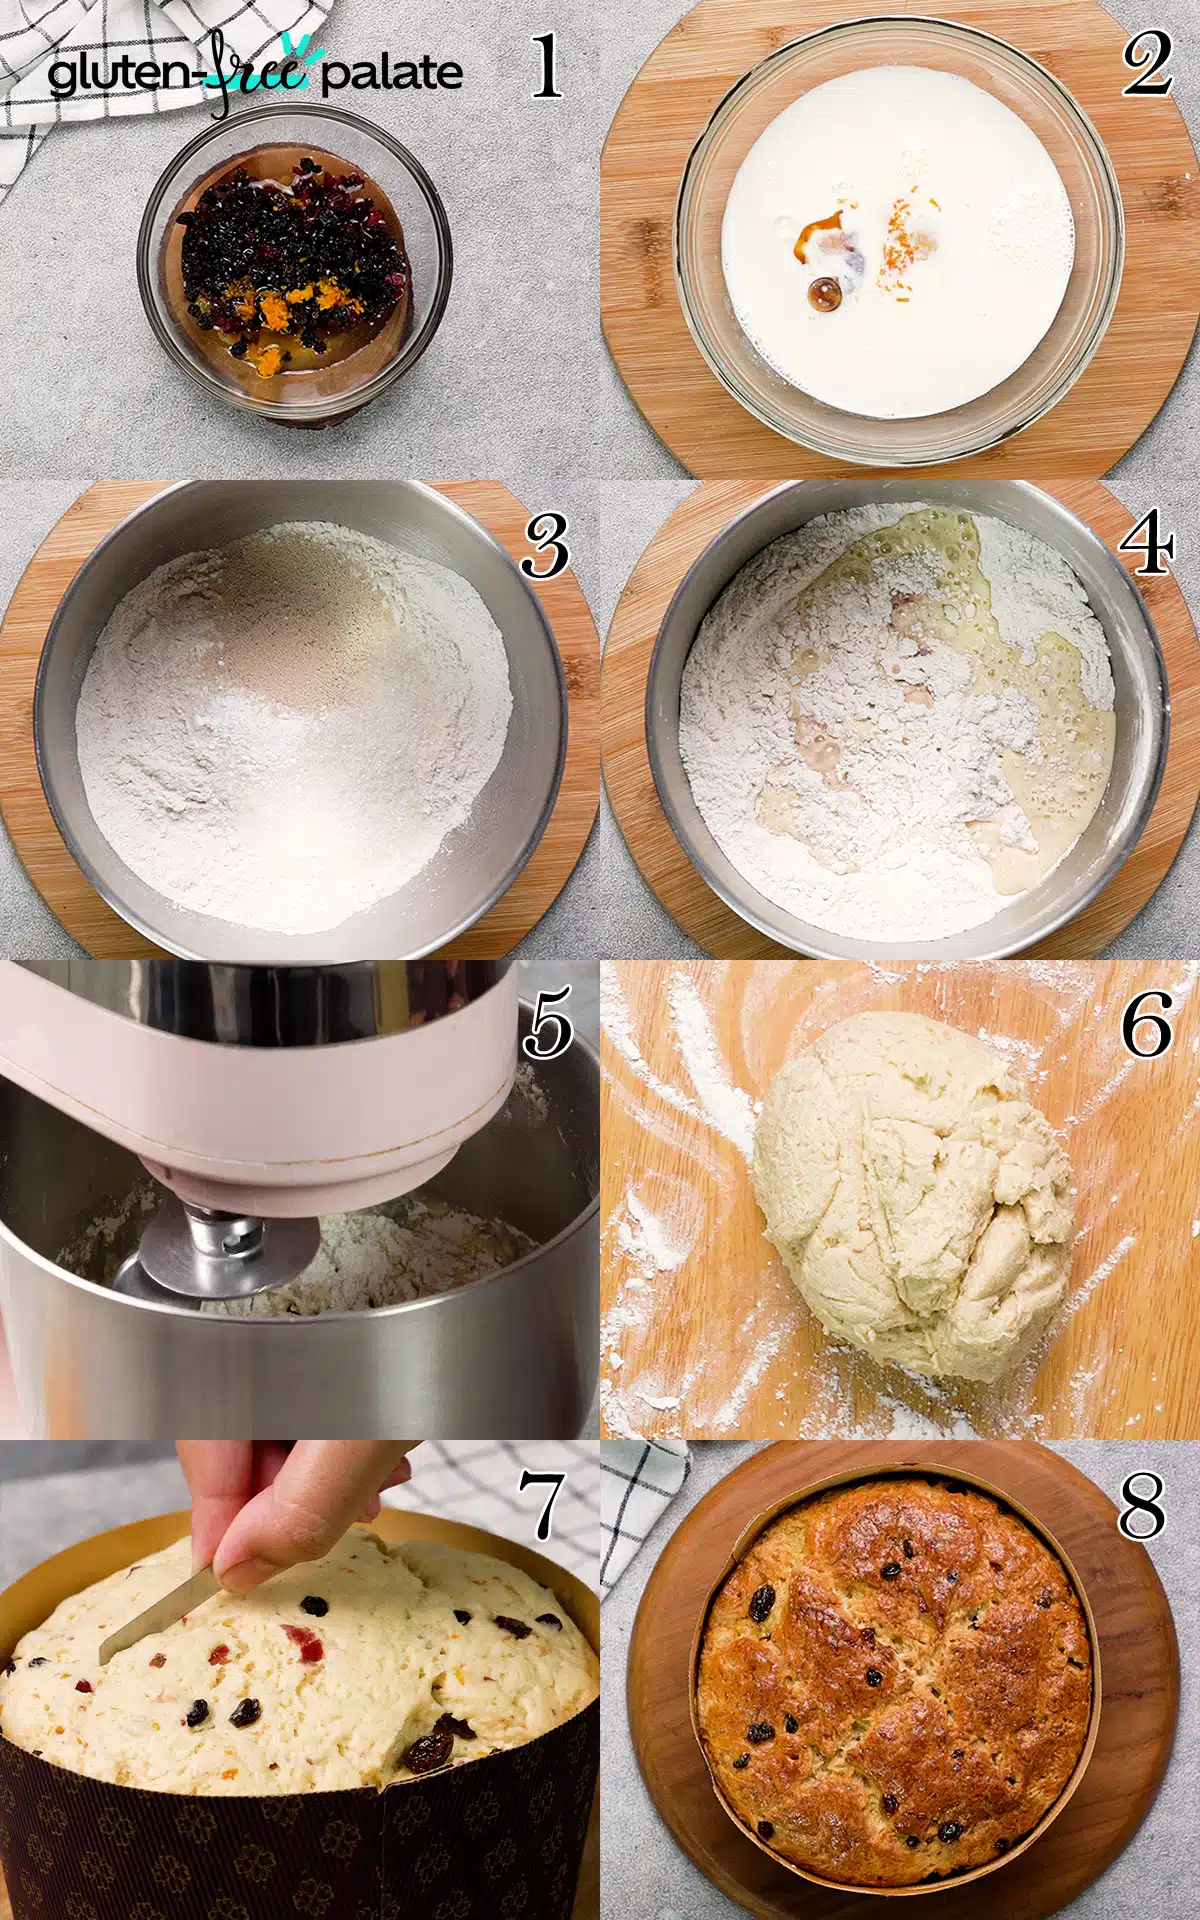 Step by step of gluten-free panettone.